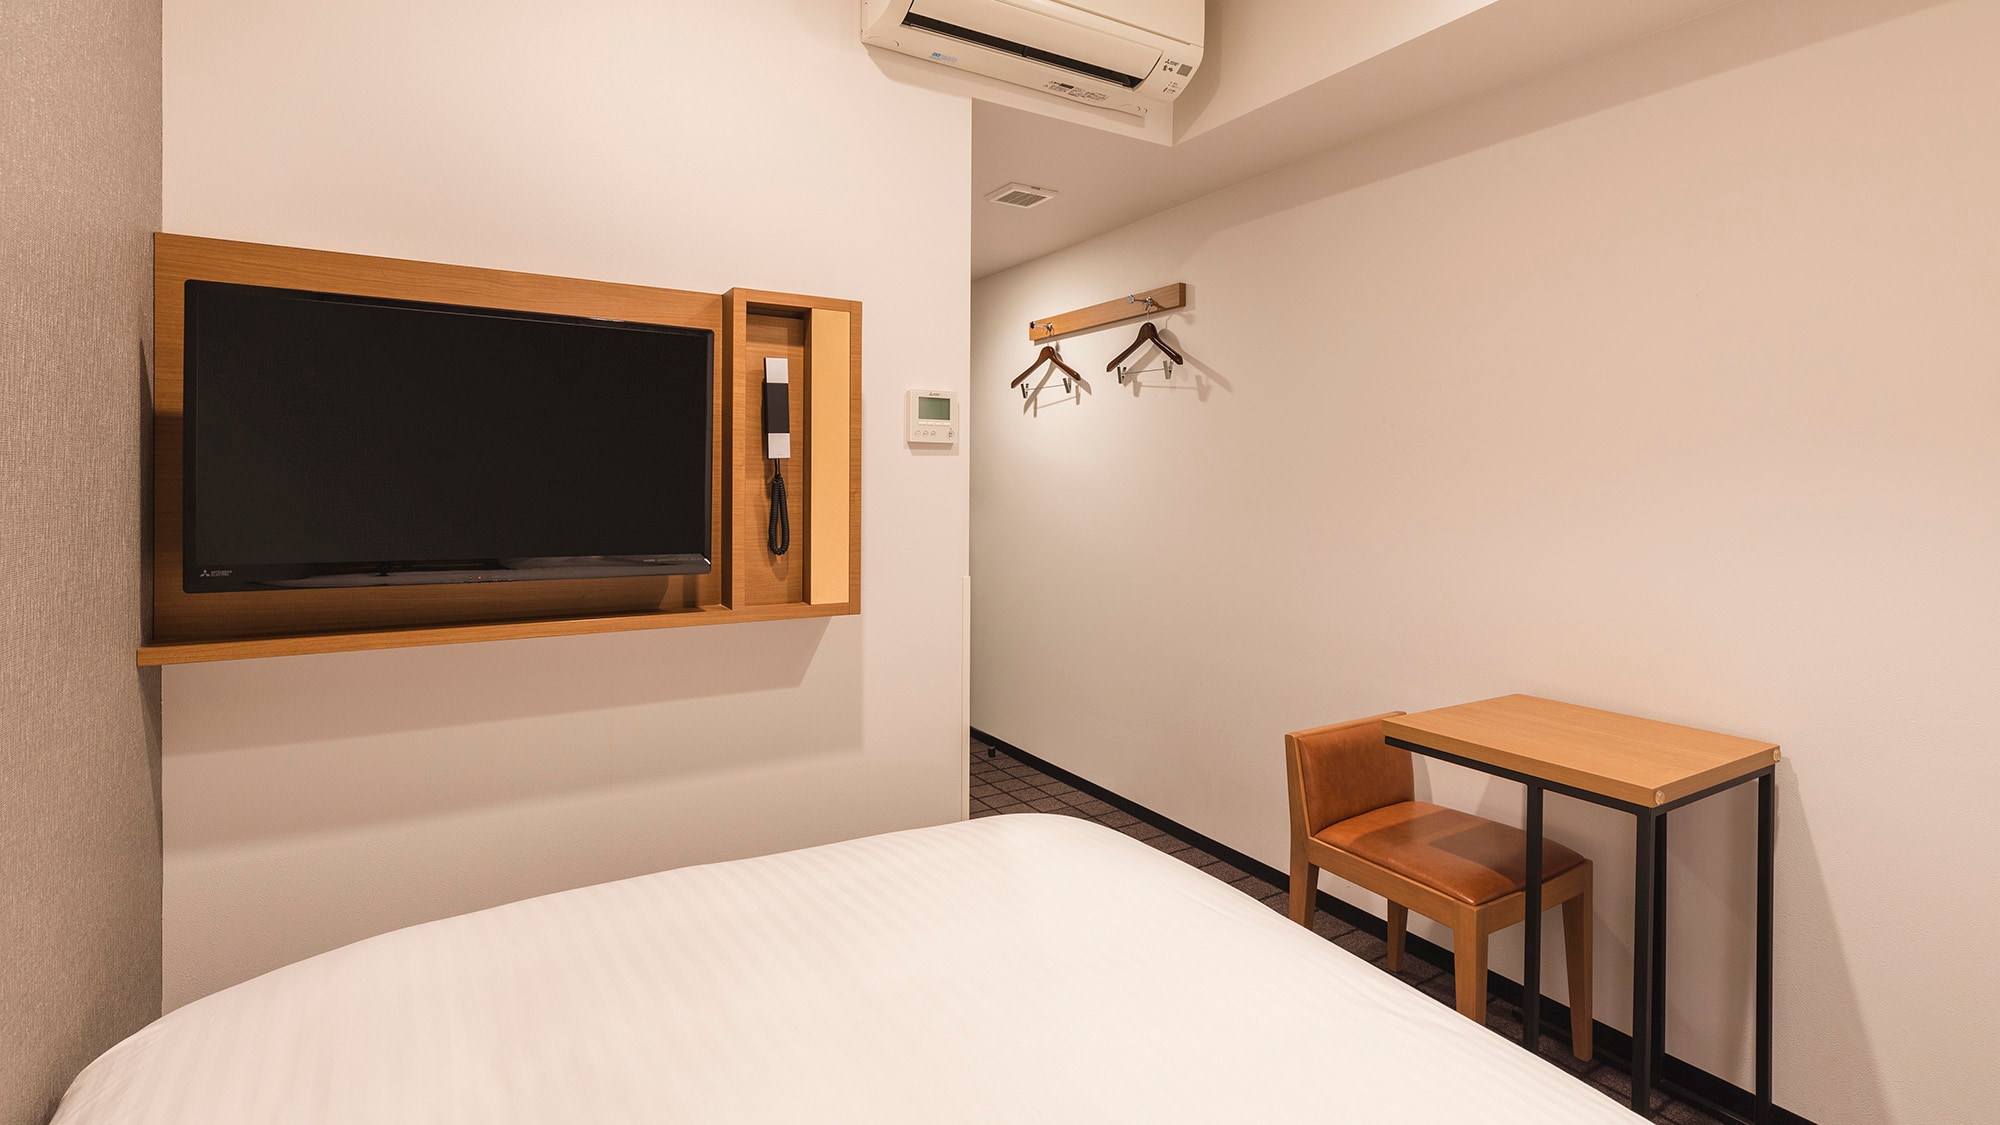 ・[Superior single] Simmons double bed (width 140 cm) is installed. You can also watch TV while lying down!